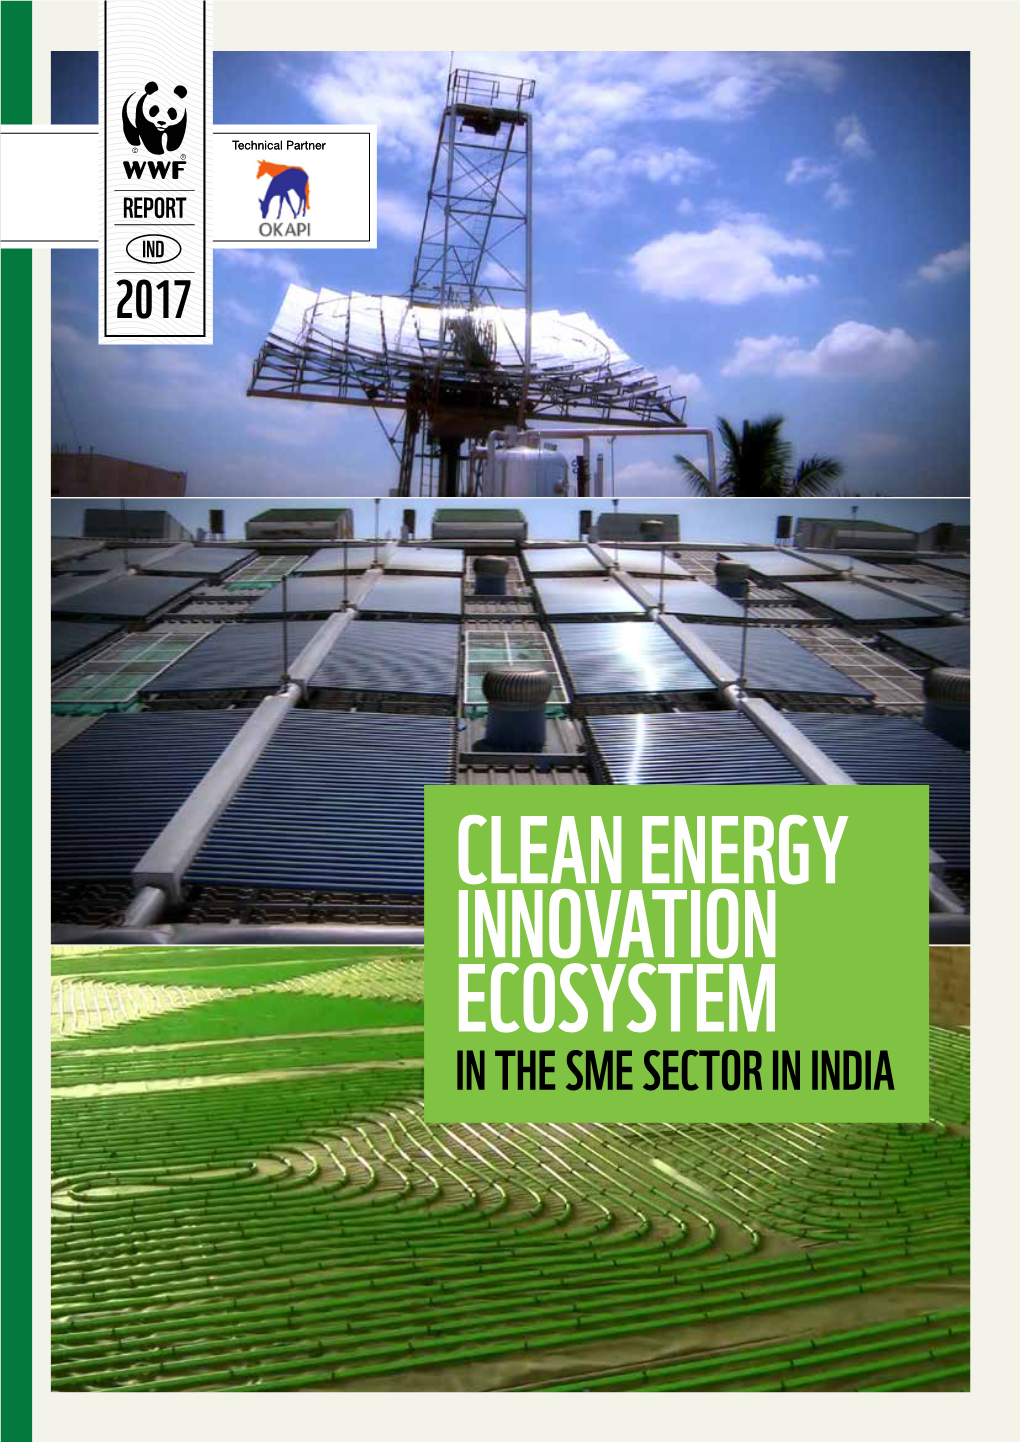 CLEAN ENERGY INNOVATION ECOSYSTEM in the SME SECTOR in INDIA © WWF-India & Okapi 2017